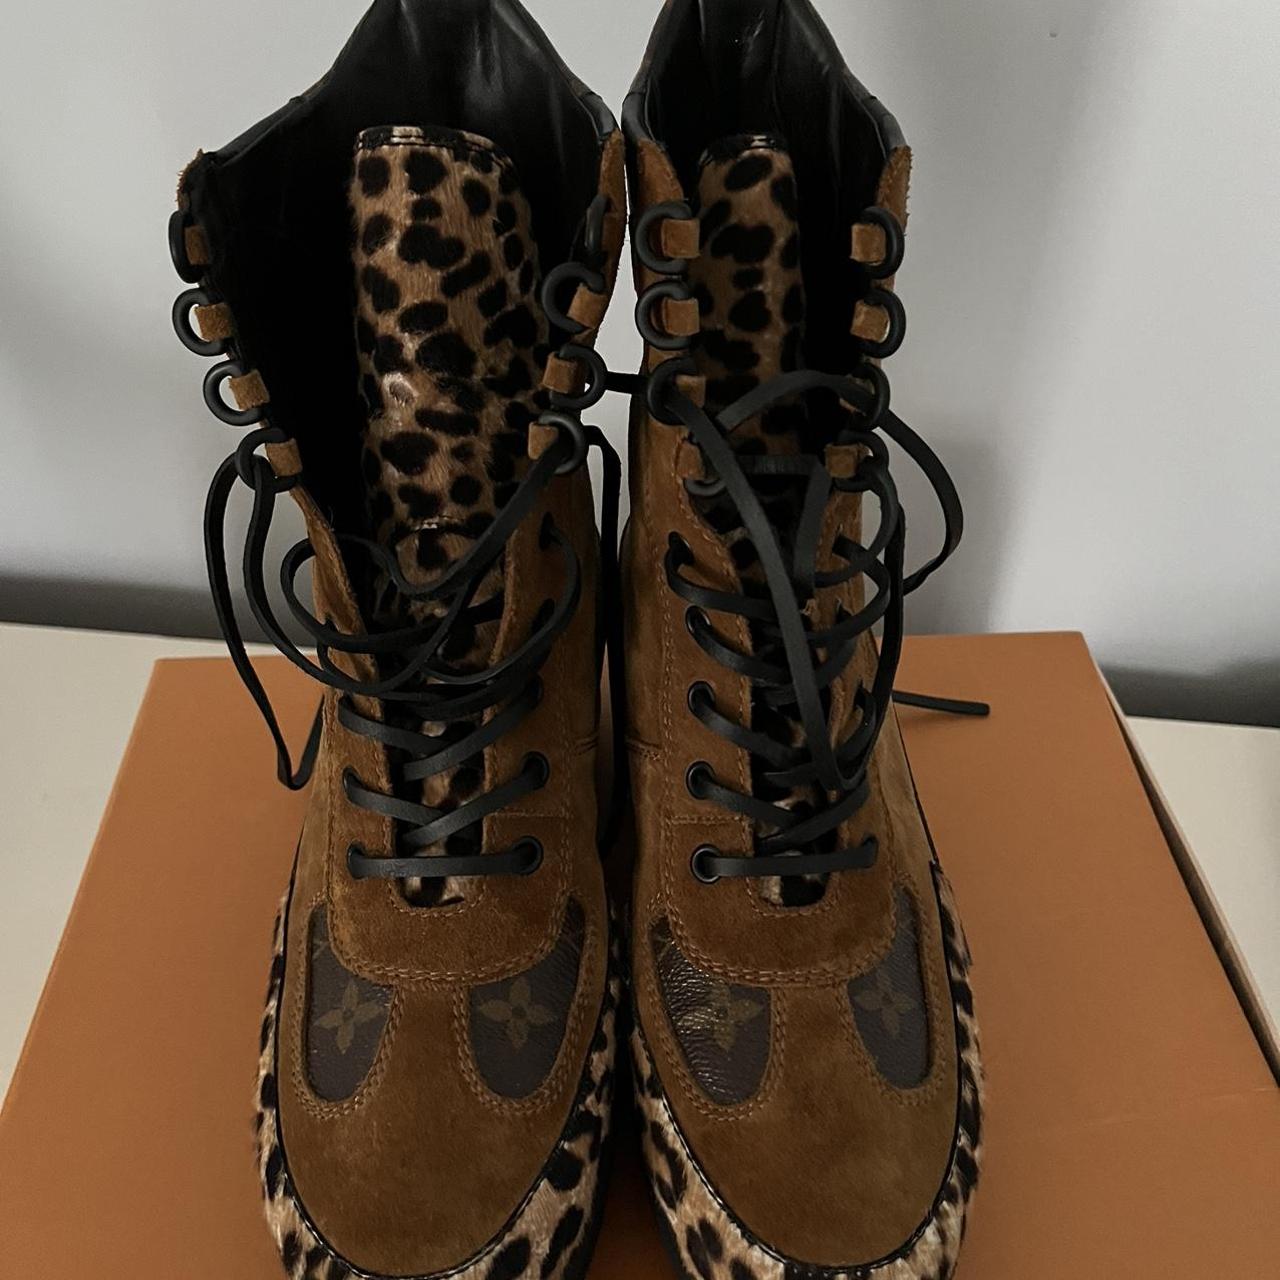 Louis Vuitton boots gently used brown and black with